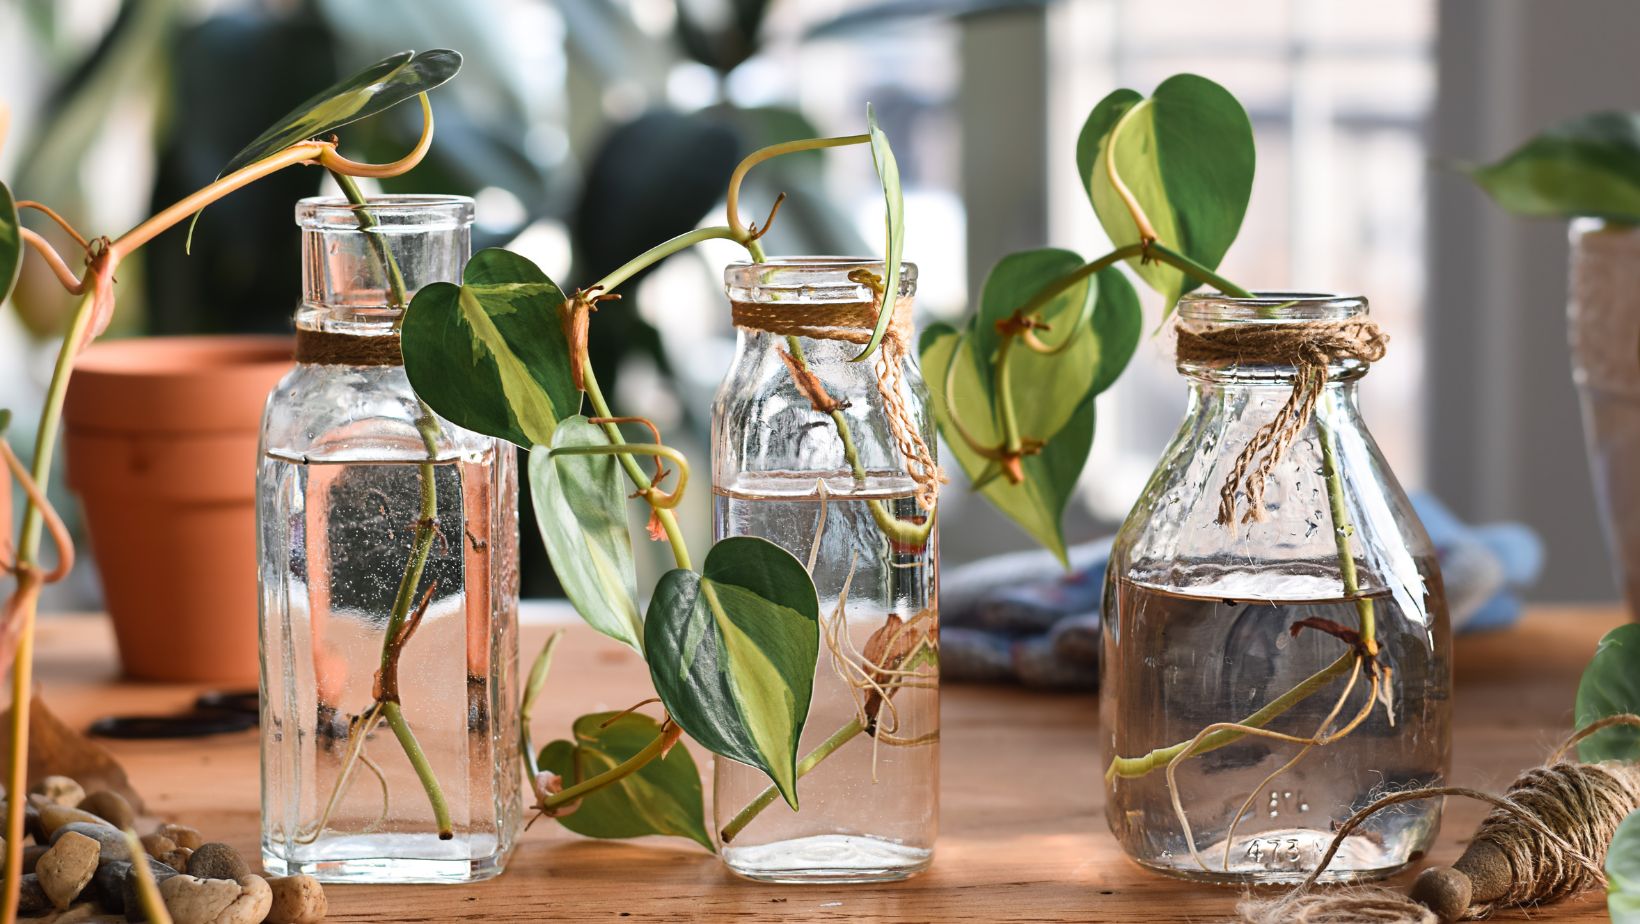 How to Propagate Plants in Water in Just 5-Easy Steps!